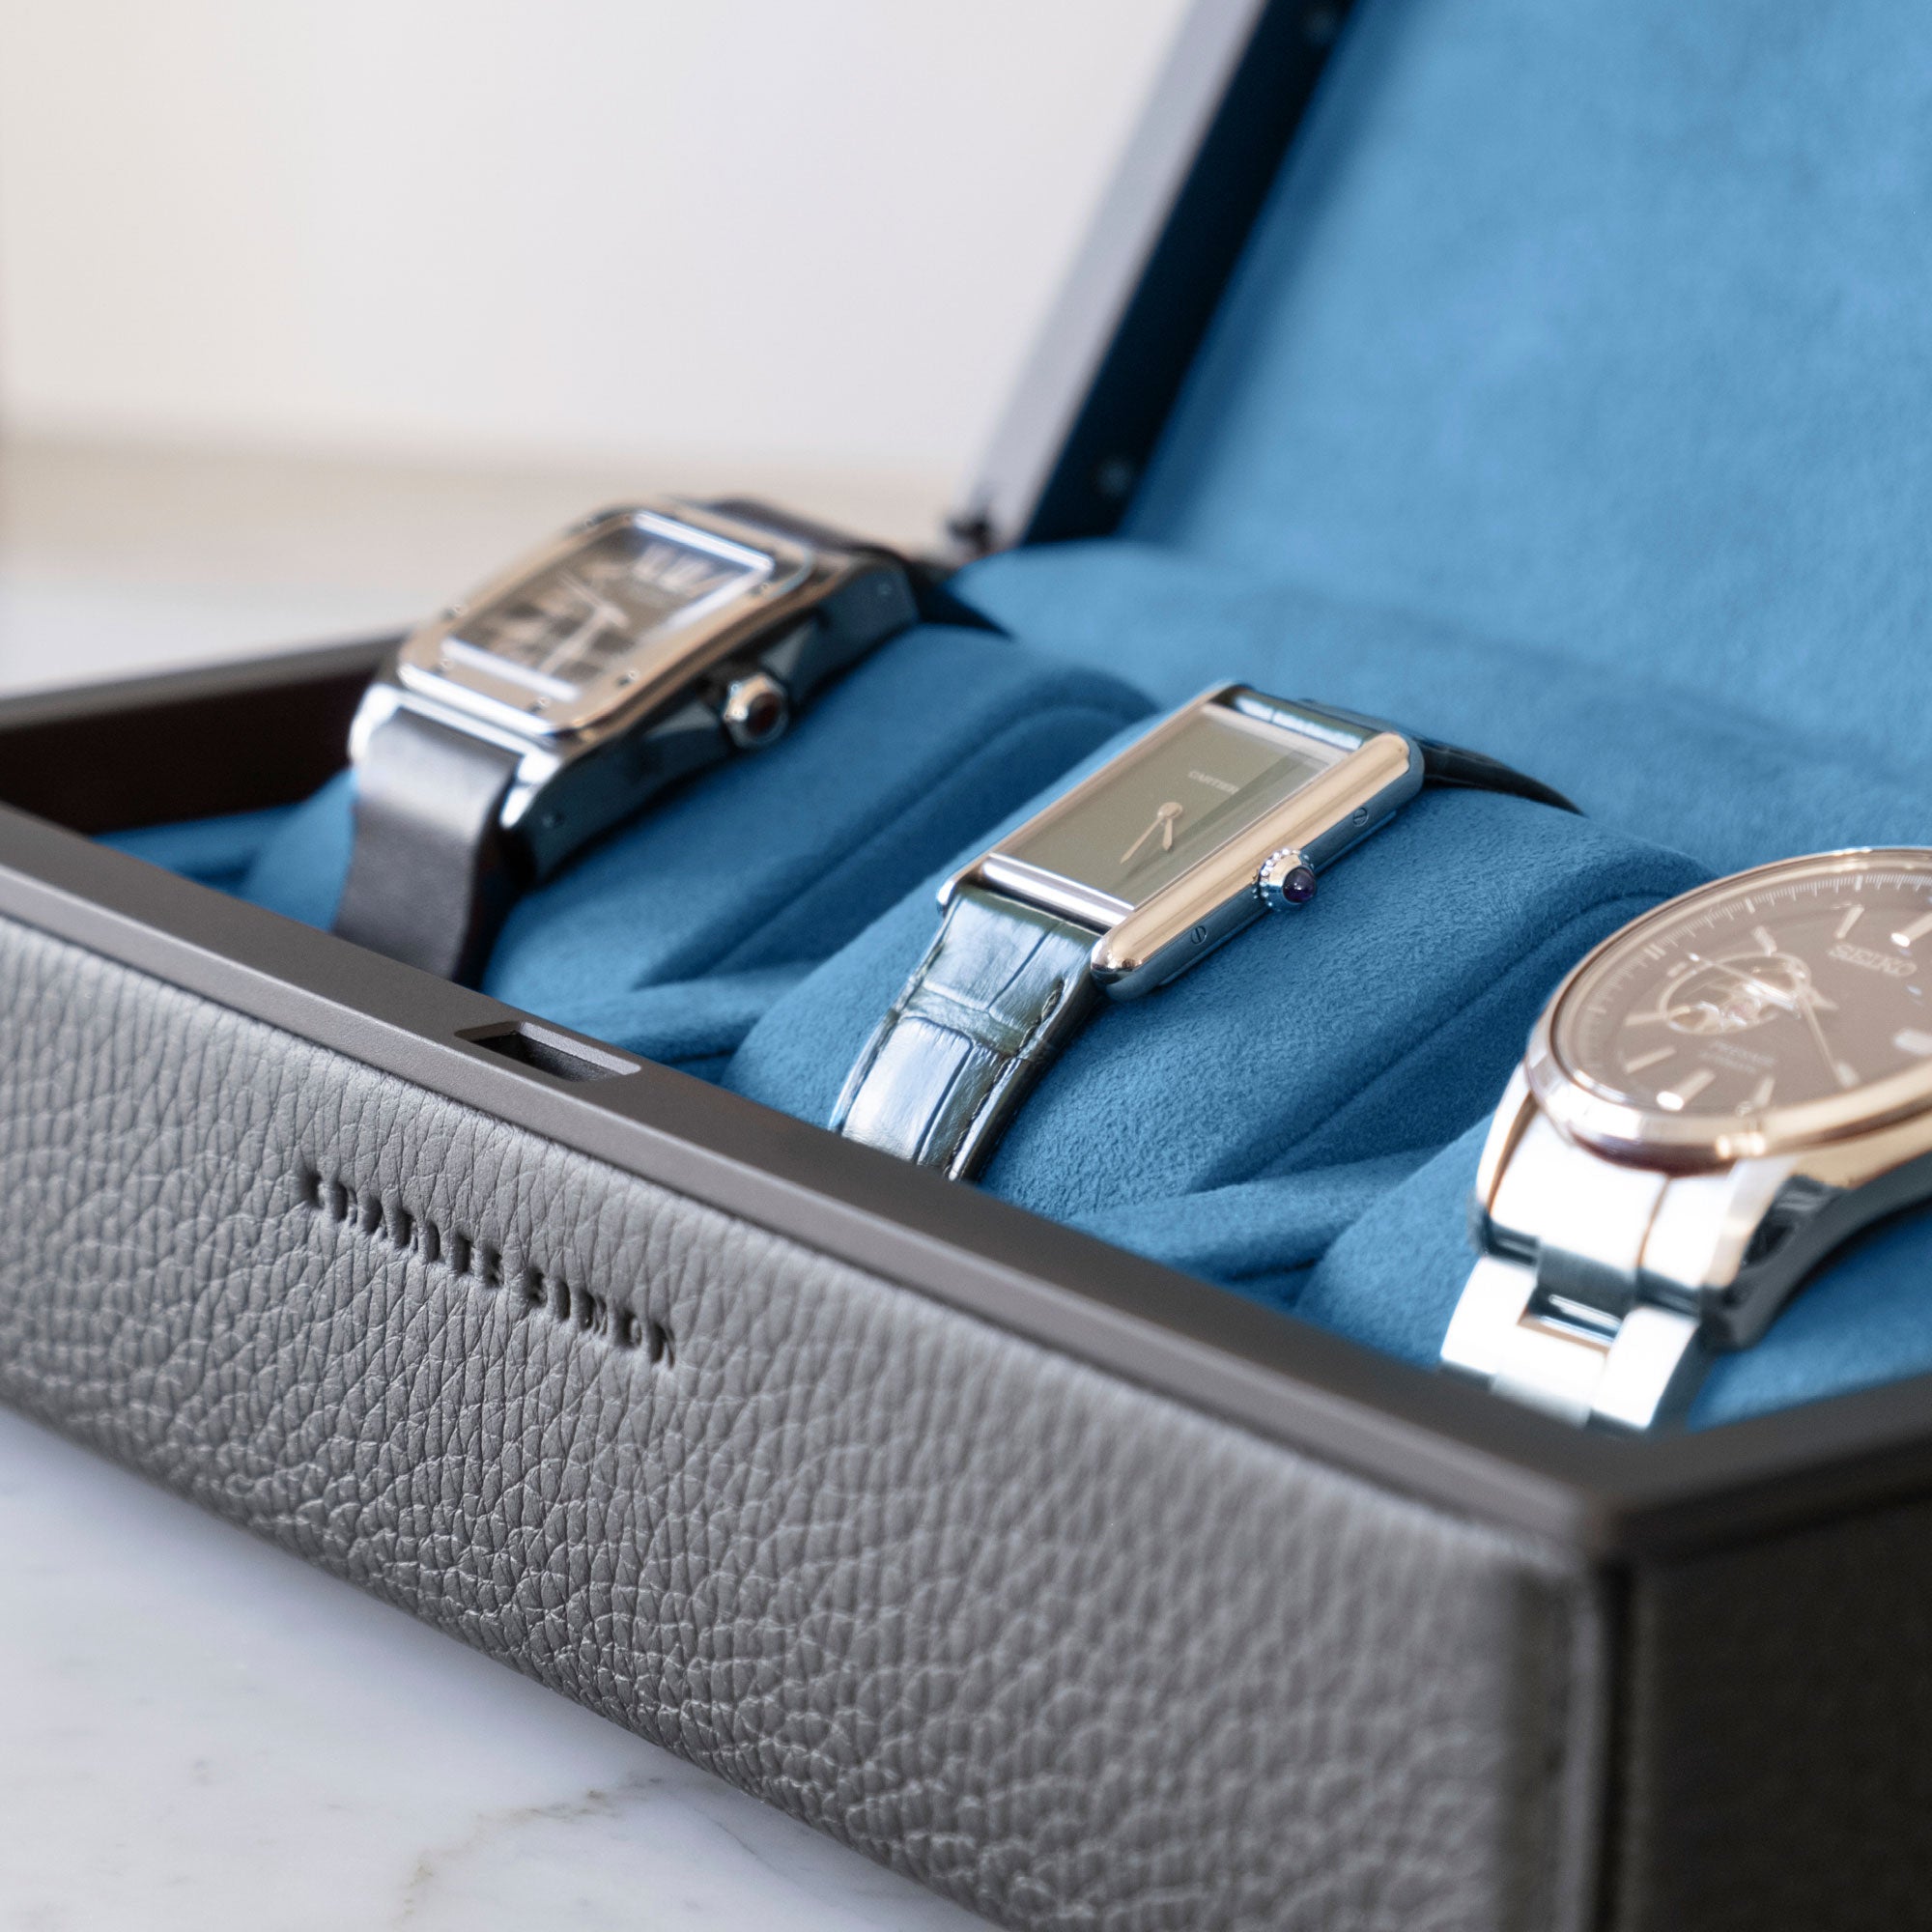 Closeup shot of Eaton 3 Watch case in black leather and soft cyan blue Alcantara interior holding 3 luxury watches including Cartier